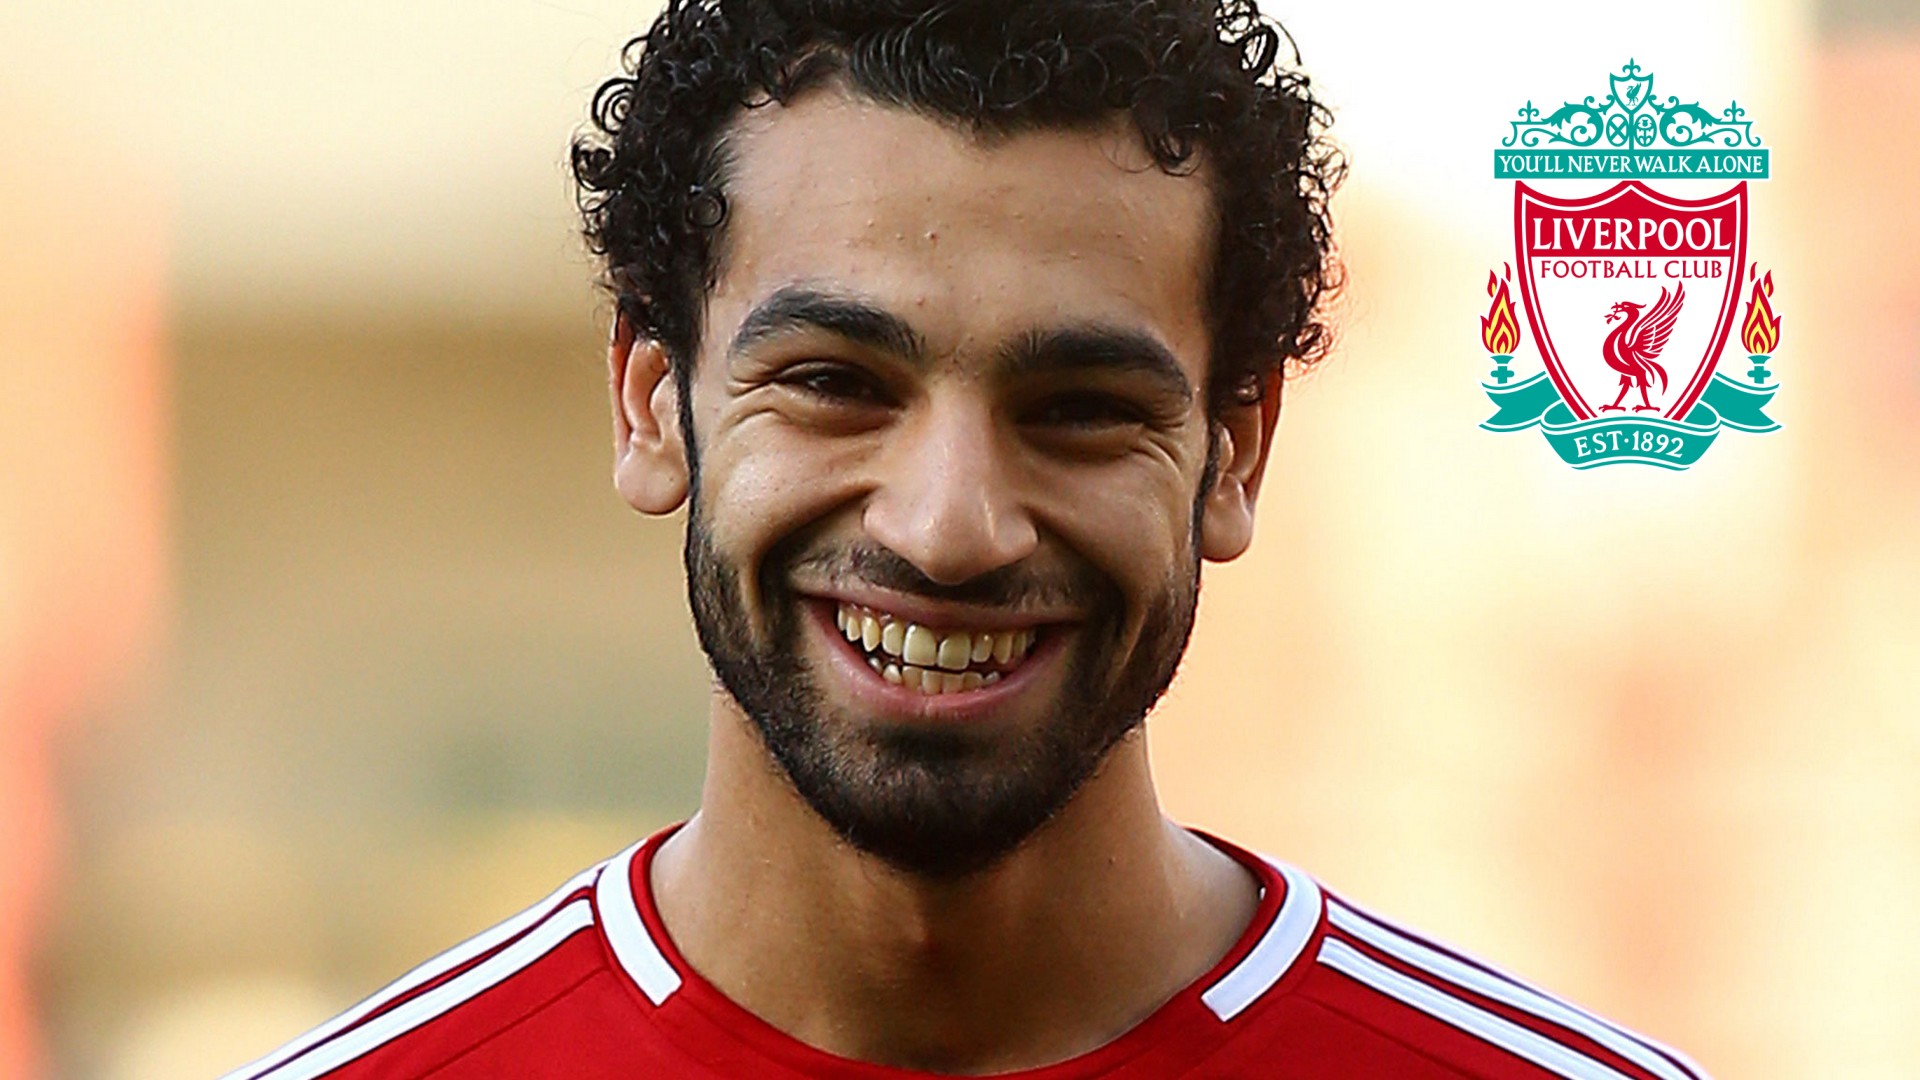 Mohamed Salah HD Wallpaper With Resolution 1920X1080 pixel. You can make this wallpaper for your Desktop Computer Backgrounds, Mac Wallpapers, Android Lock screen or iPhone Screensavers